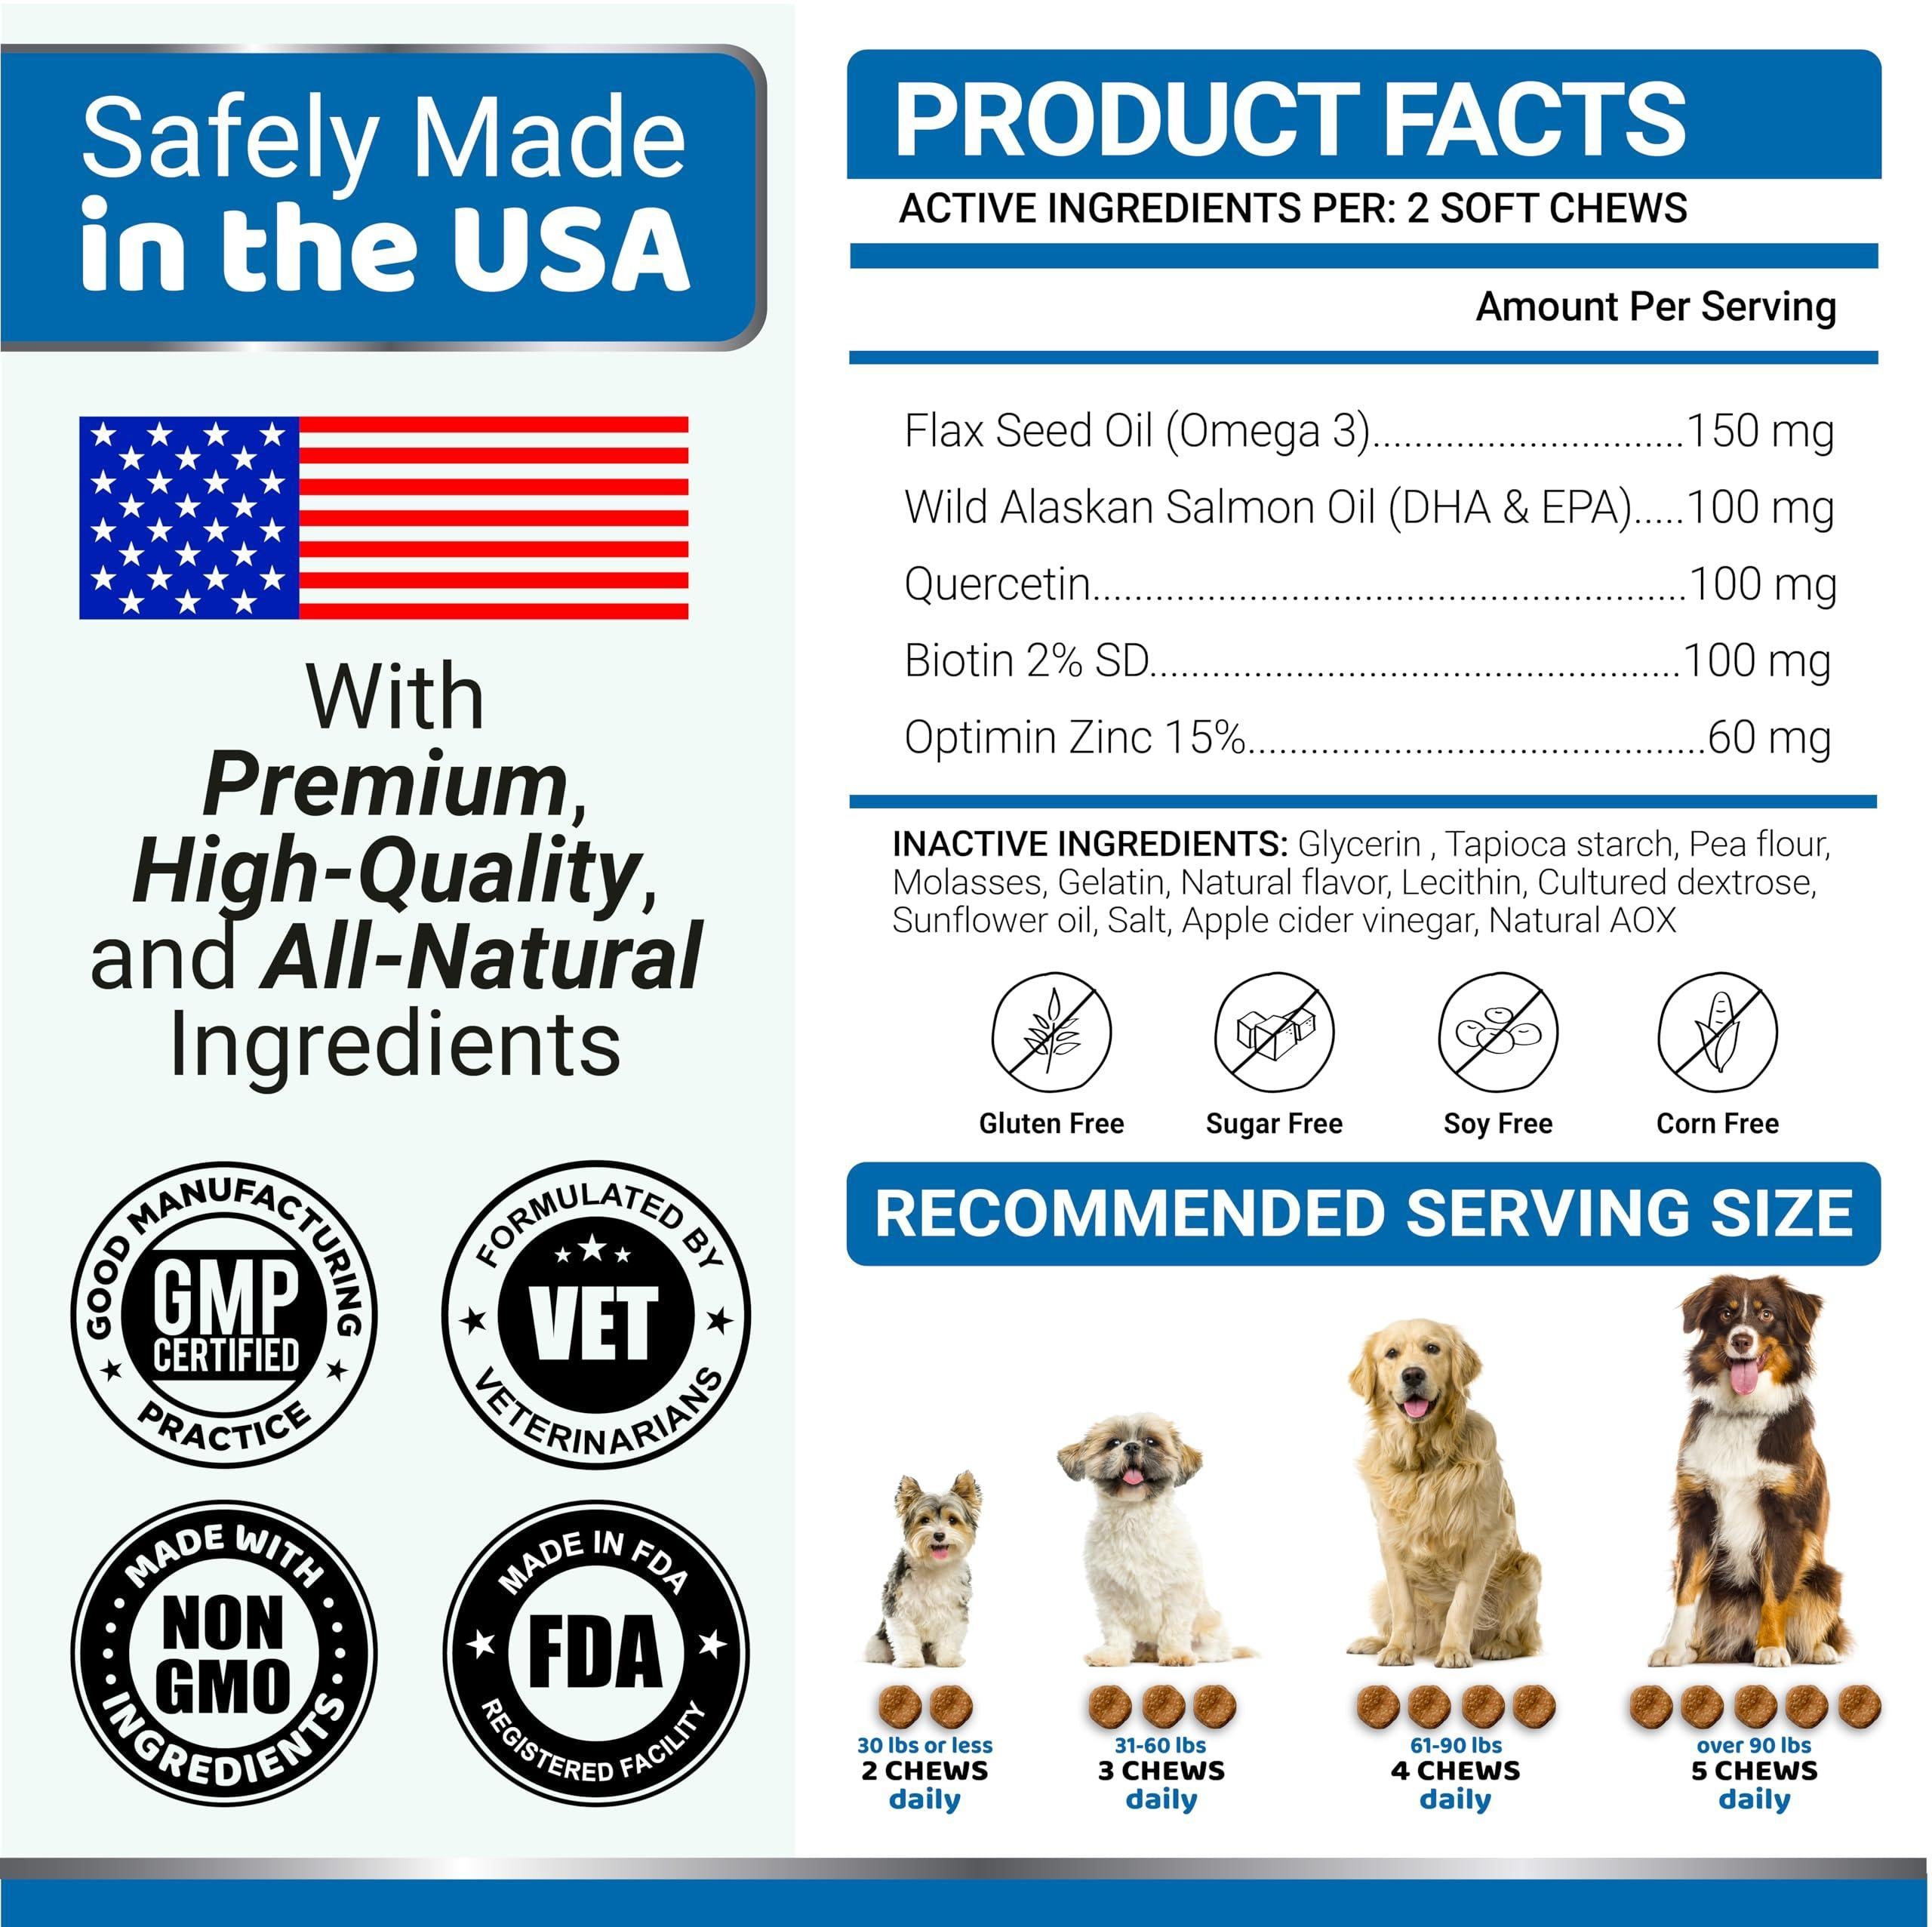 Omega 3 Fish Oil for Dogs   170 Chews   Skin and Coat Supplement   Omega 3 for Dogs   Dry & Itchy Skin Relief Treatment   Allergy Support   Dog Anti Shedding Treats   Shiny Coats   EPA & DHA   Salmon